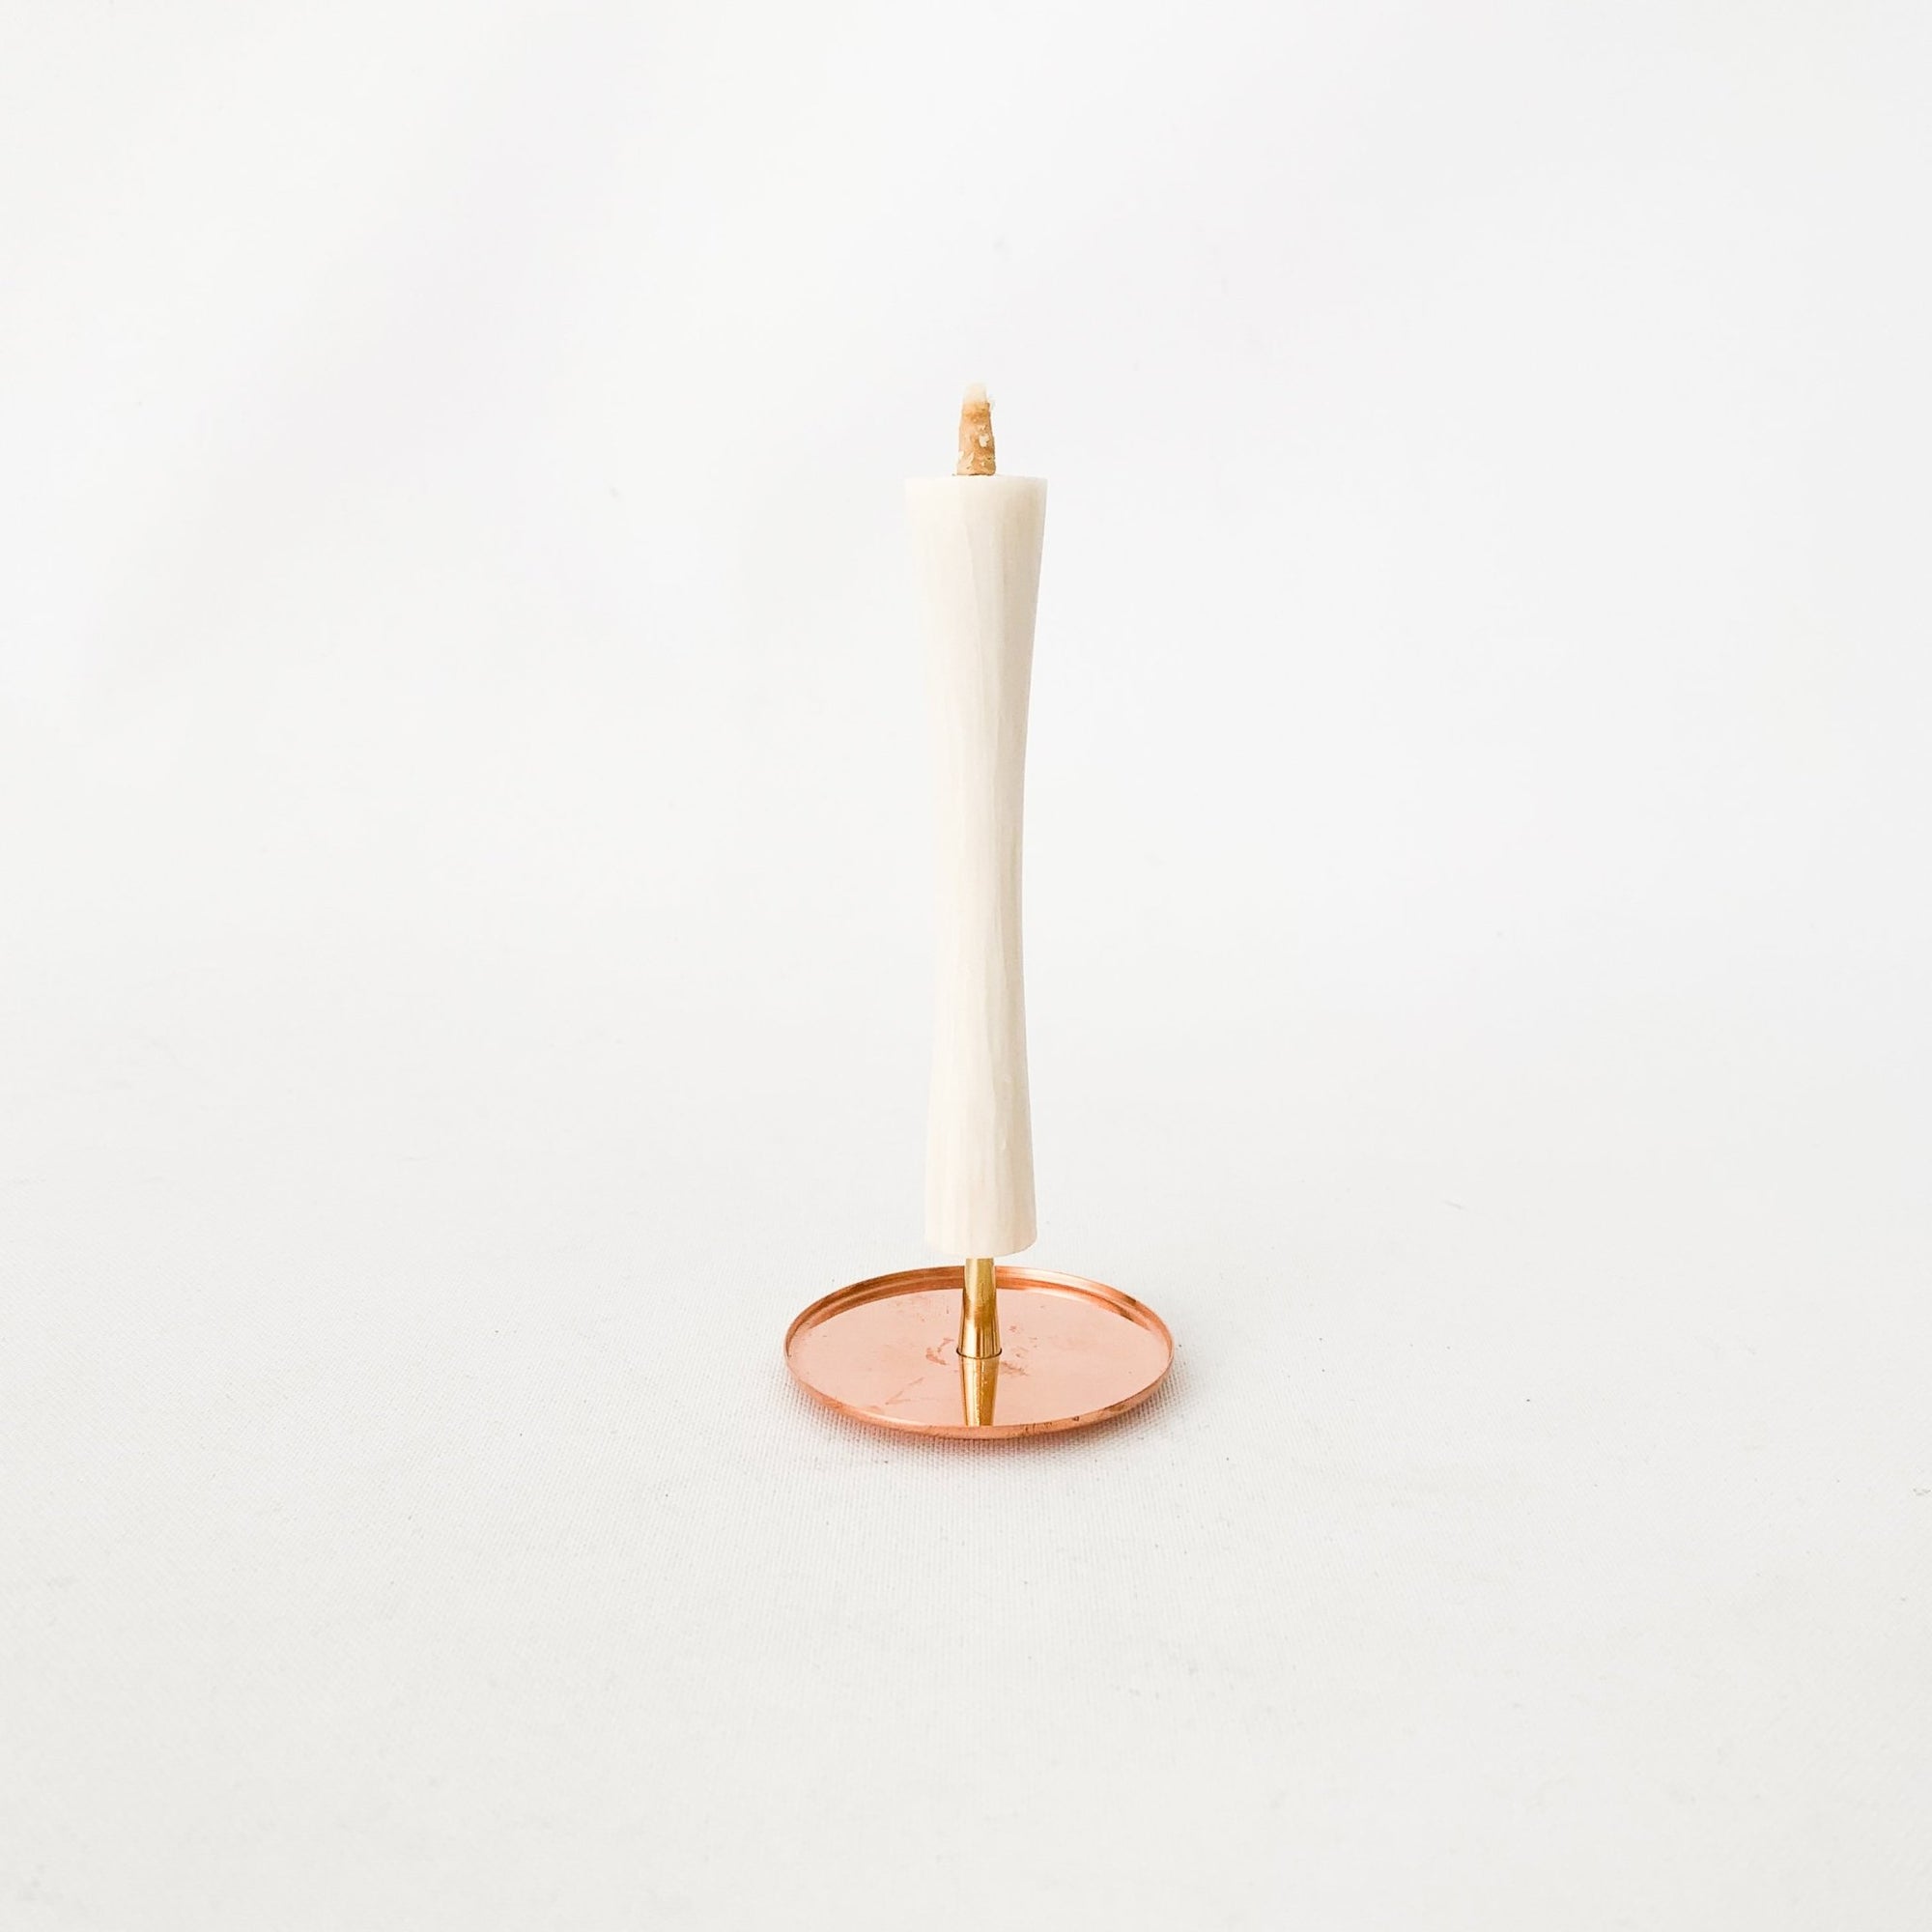 Fstyle Japanese Candle Stand - tortoise general store